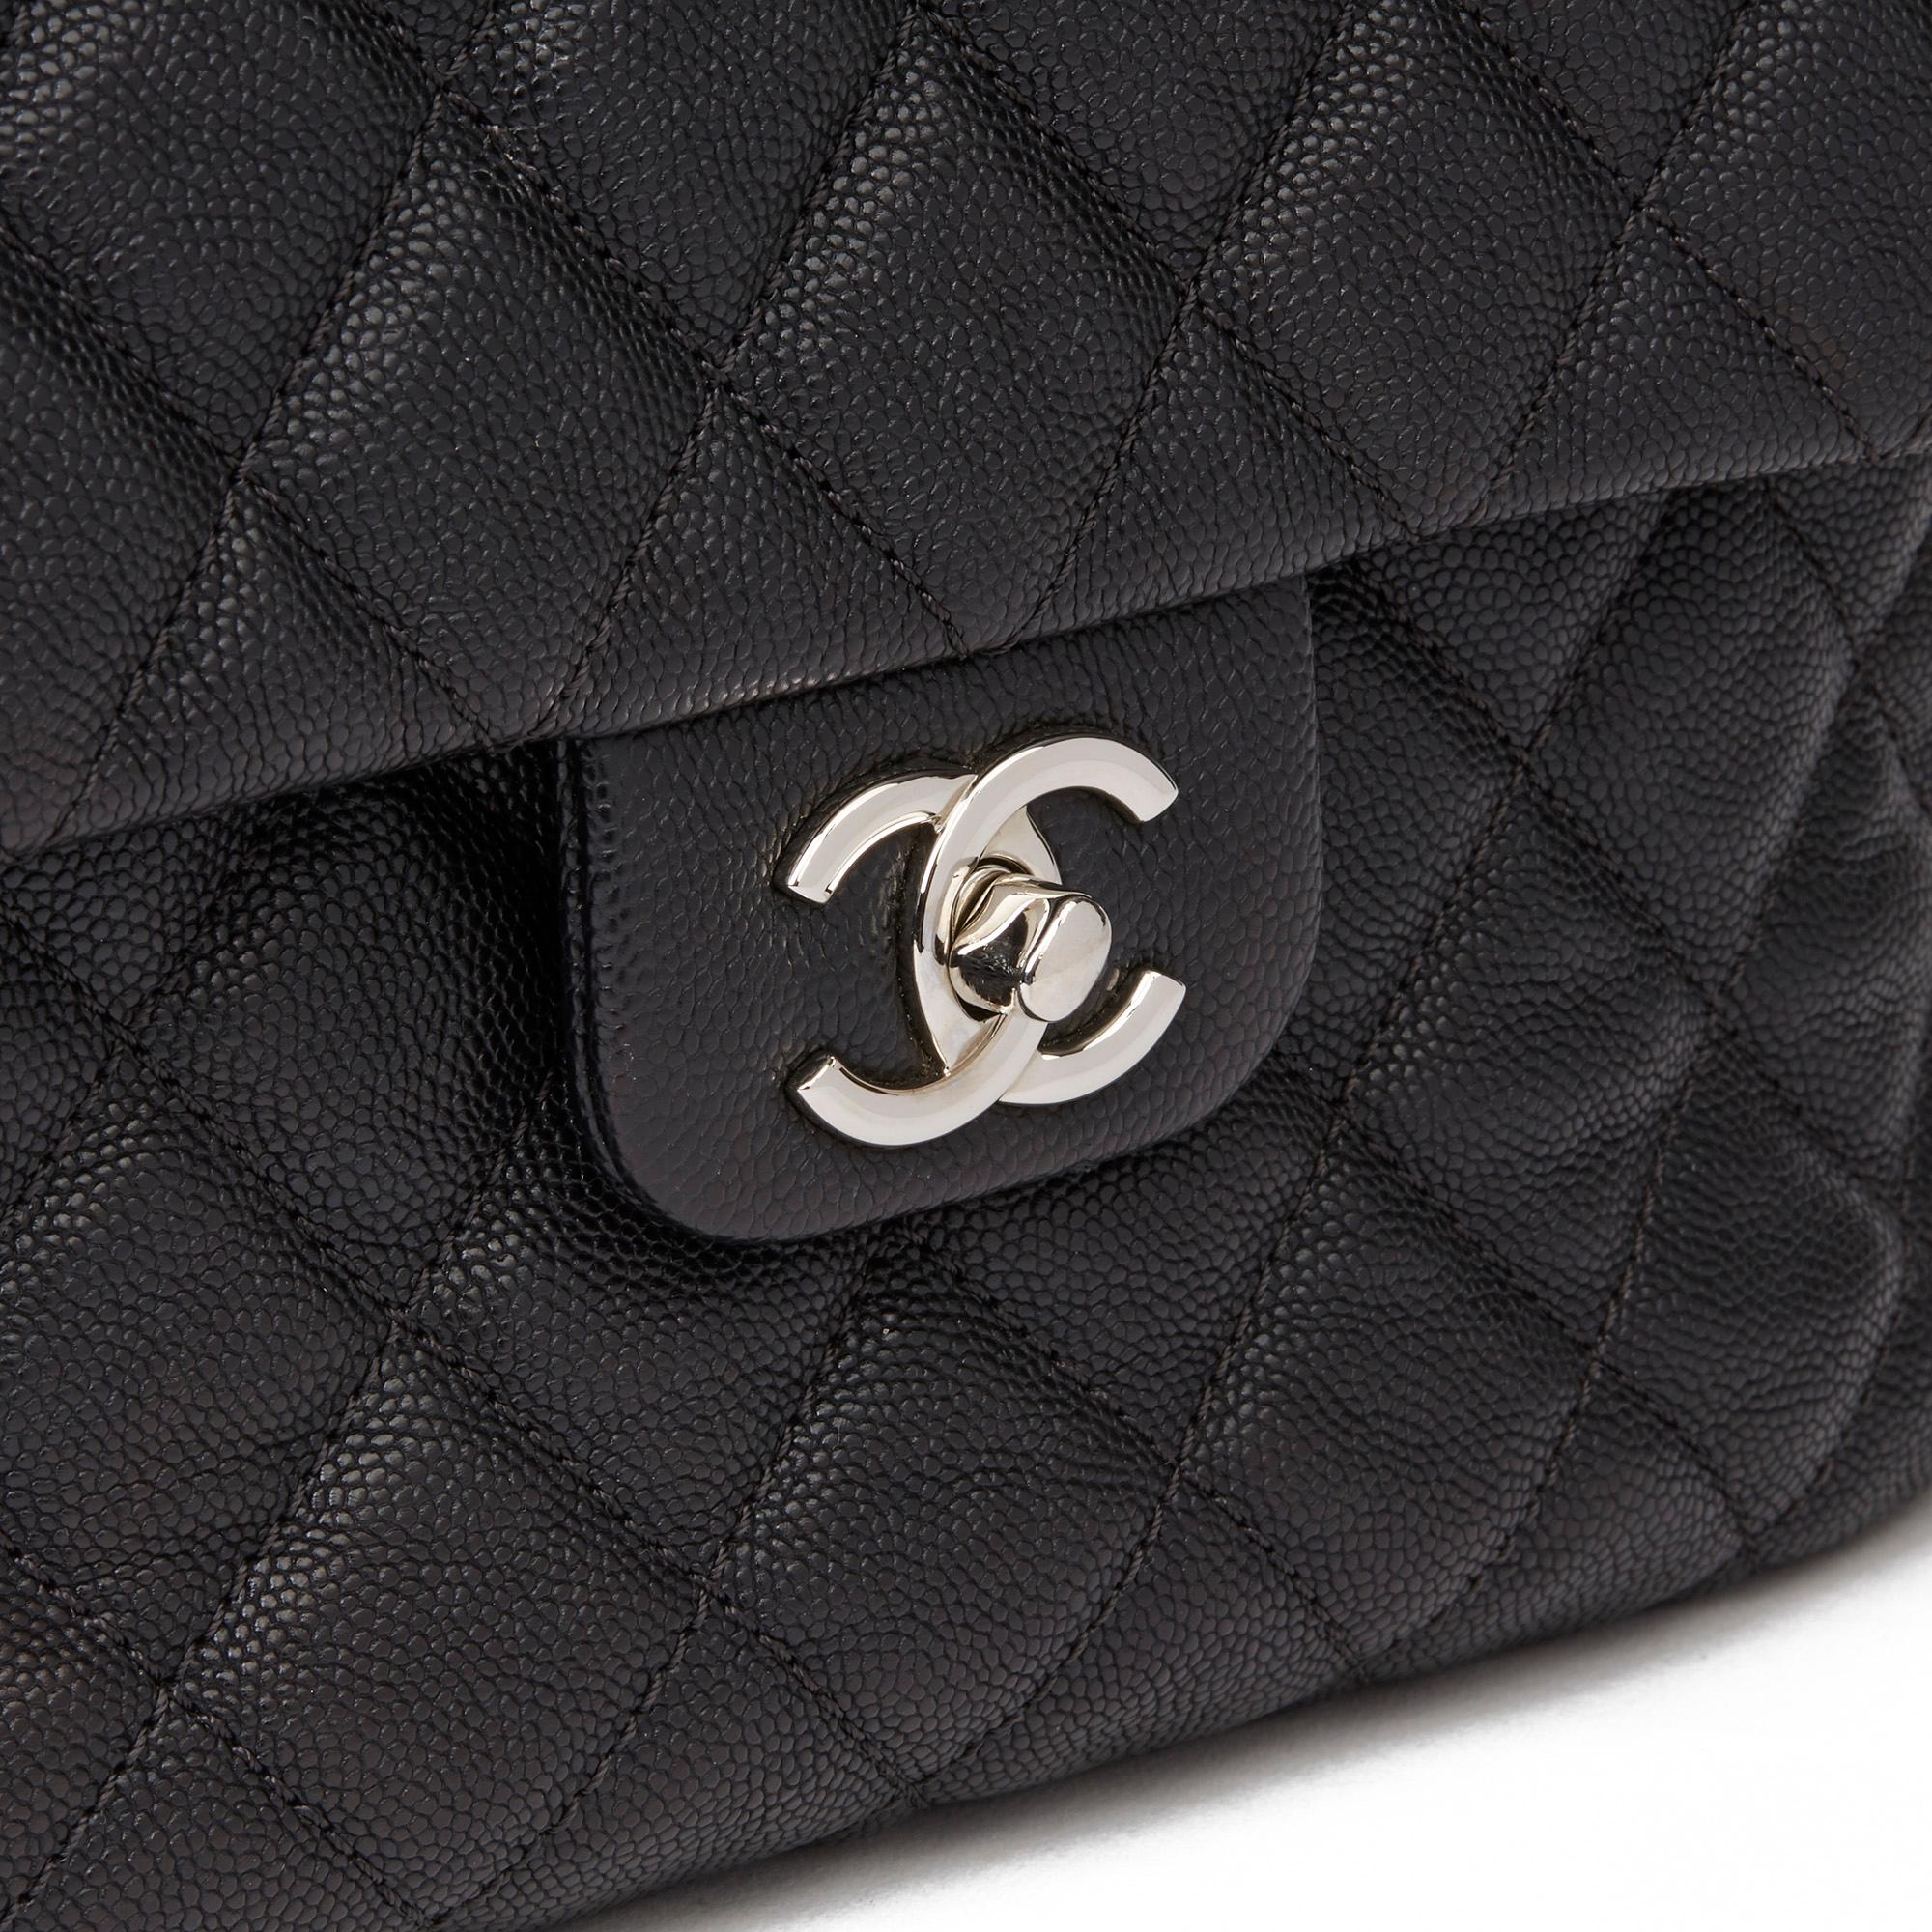 2019 Chanel Black Quilted Caviar Leather Urban Companion Flap Bag   2